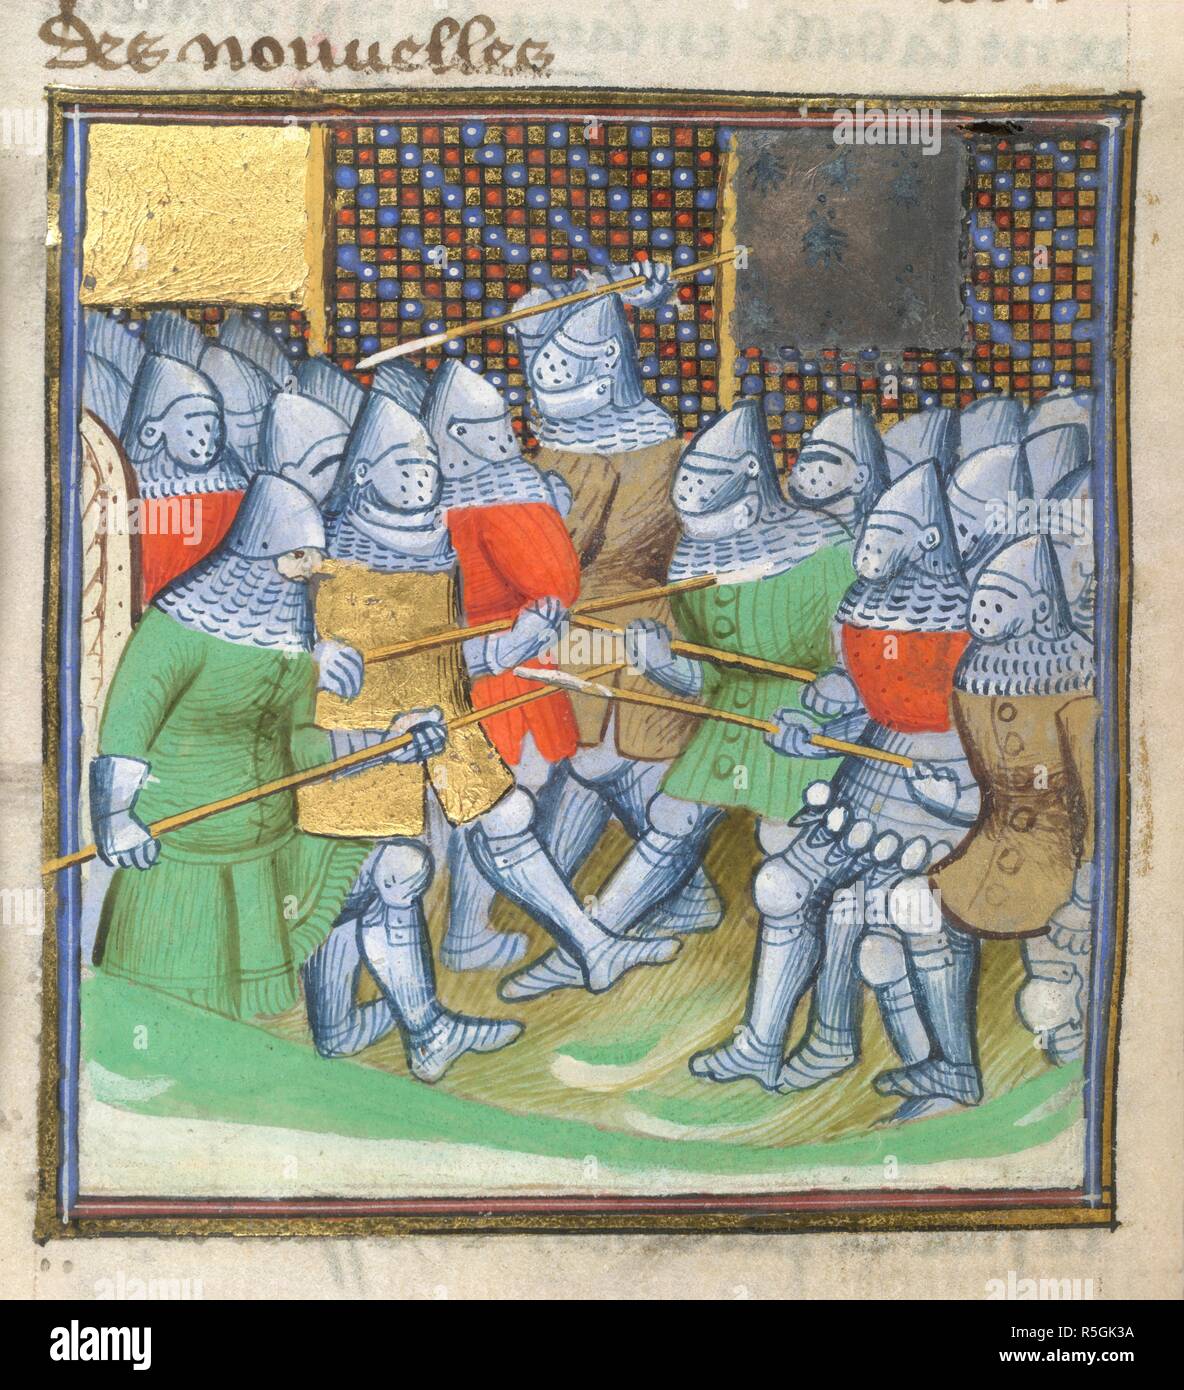 Medieval soldiers fighting. 'Les Croniques DangLeterre' (Chroniques d'Angleterre). 15th century. Source: Arundel 67 (part 1), f.341v. Language: French. Author: FROISSART, JEAN. Stock Photo